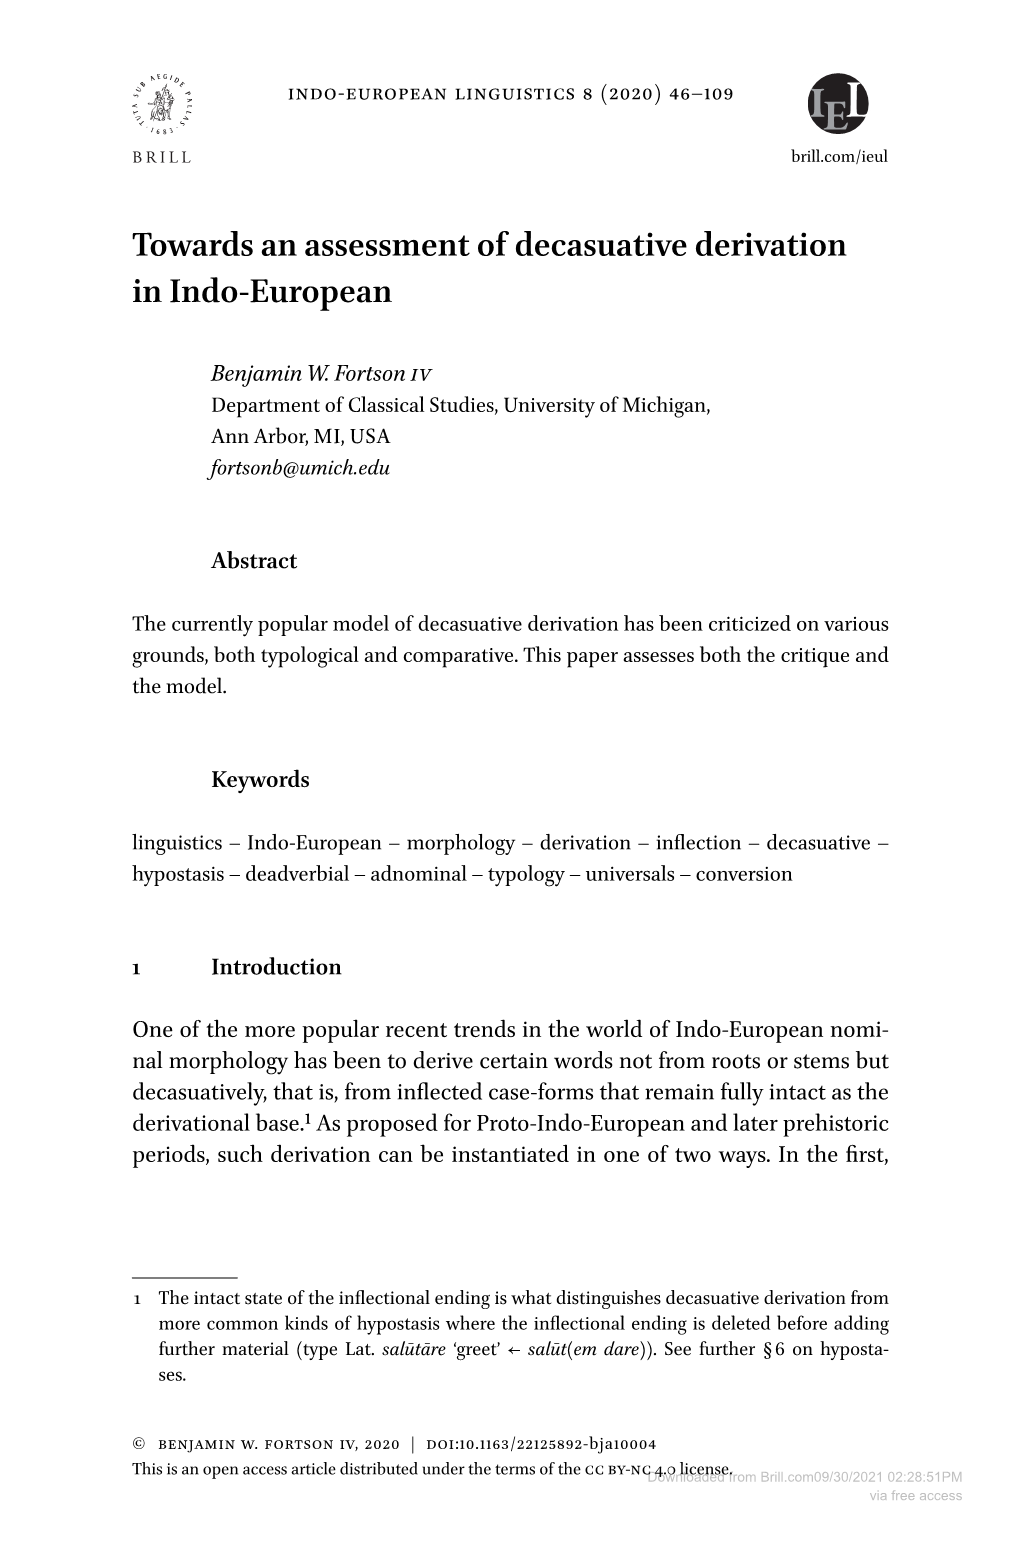 Towards an Assessment of Decasuative Derivation in Indo-European